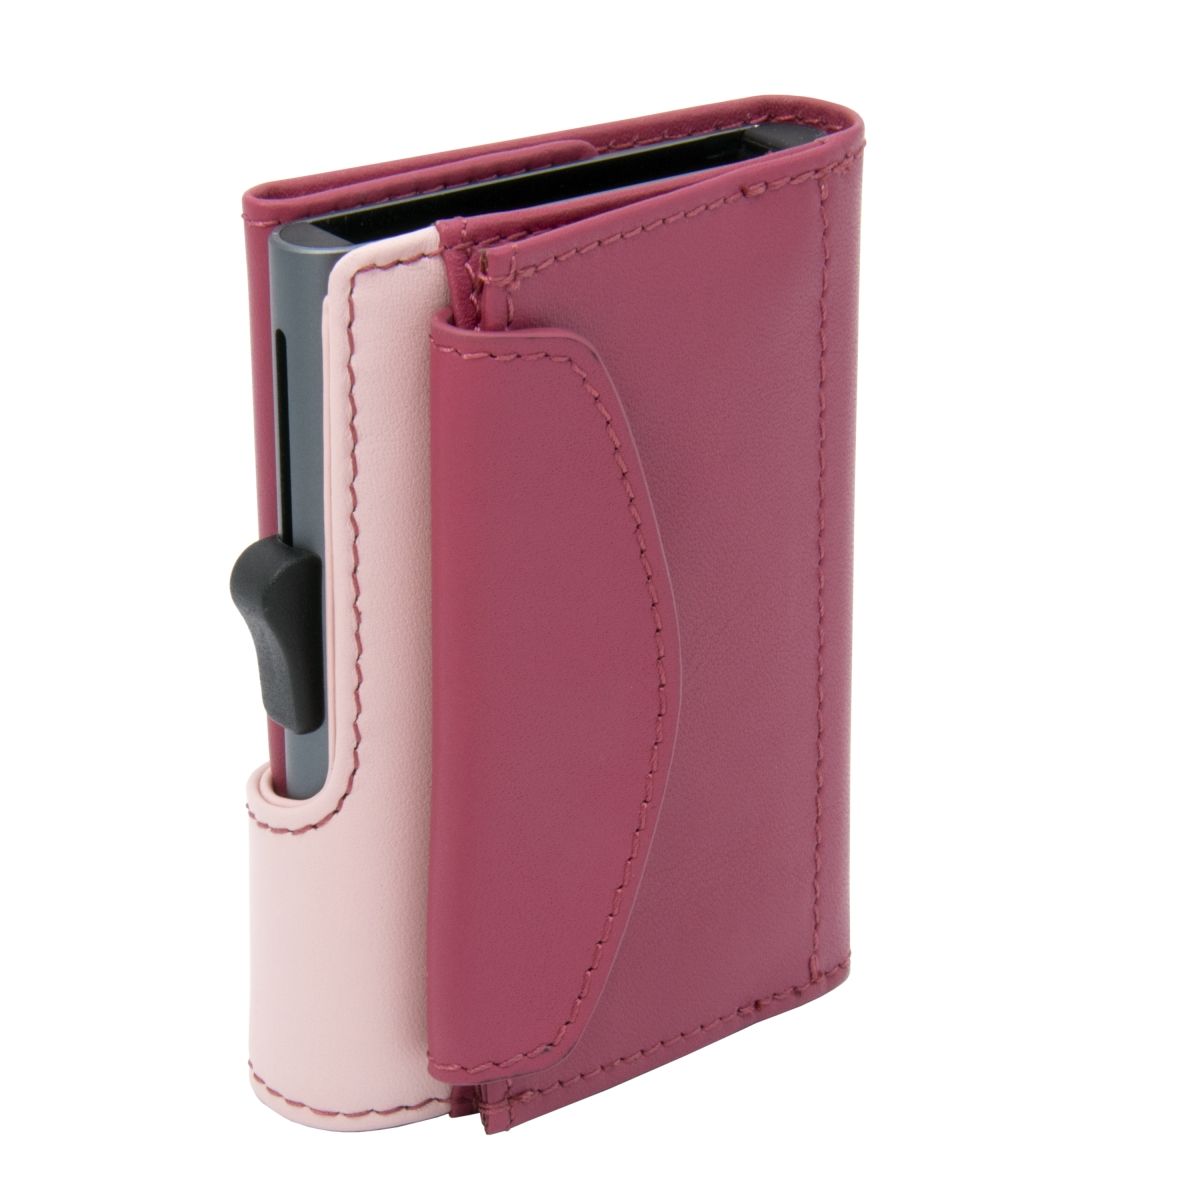 C-Secure XL Aluminum Wallet with Genuine Leather and Coins Pocket - Cherry/Blush